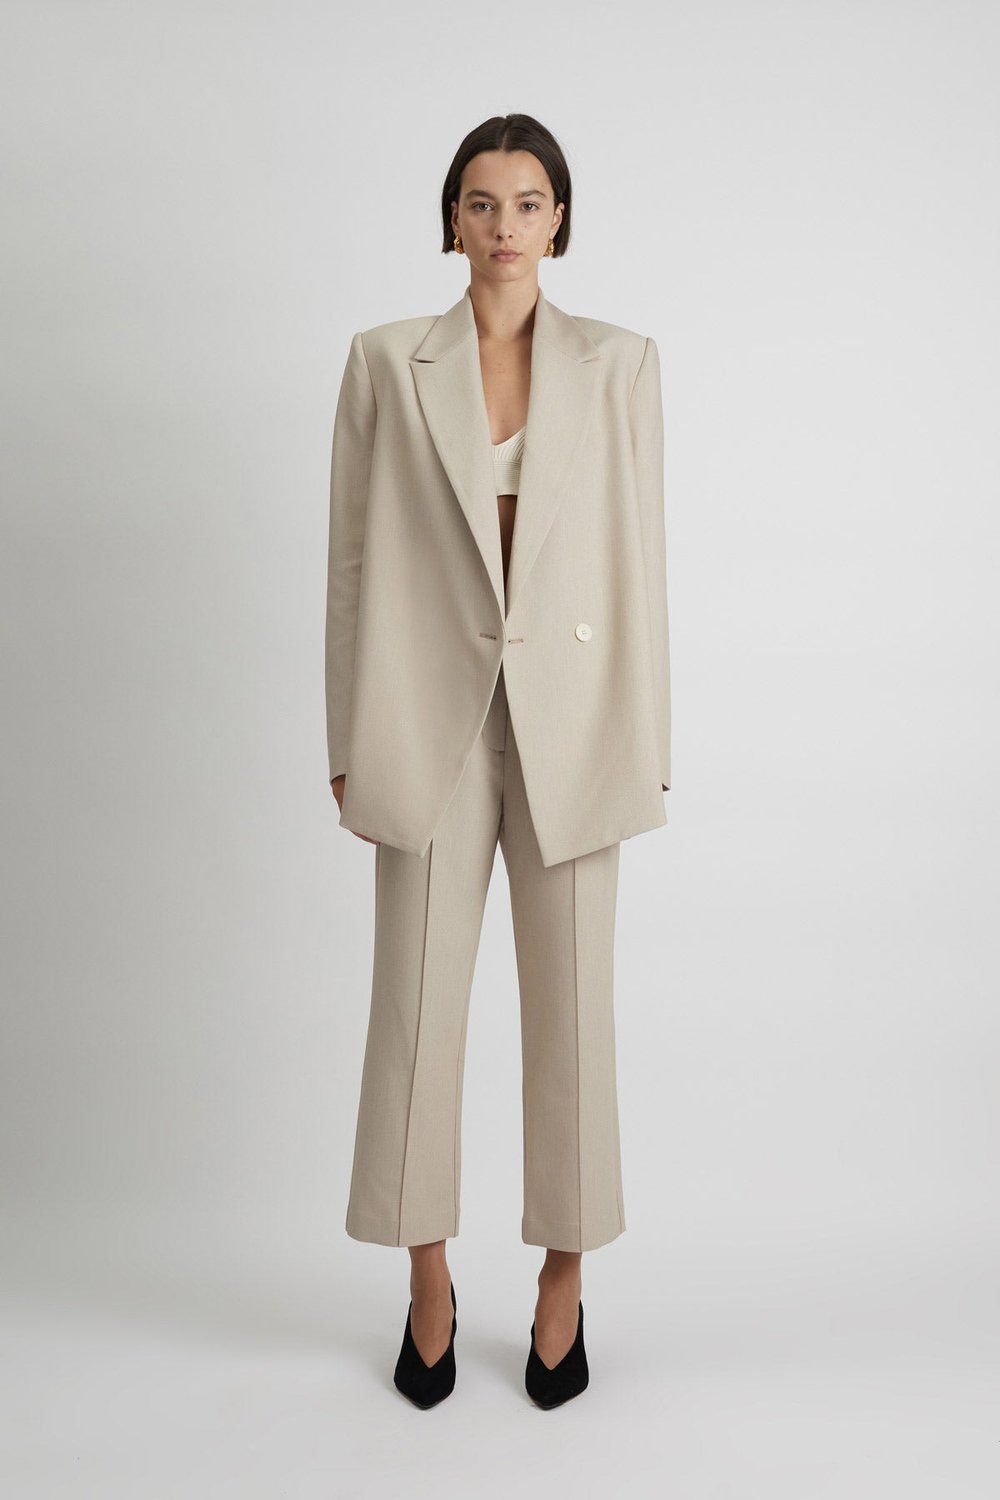 Camilla and Marc Mae Suit $1045